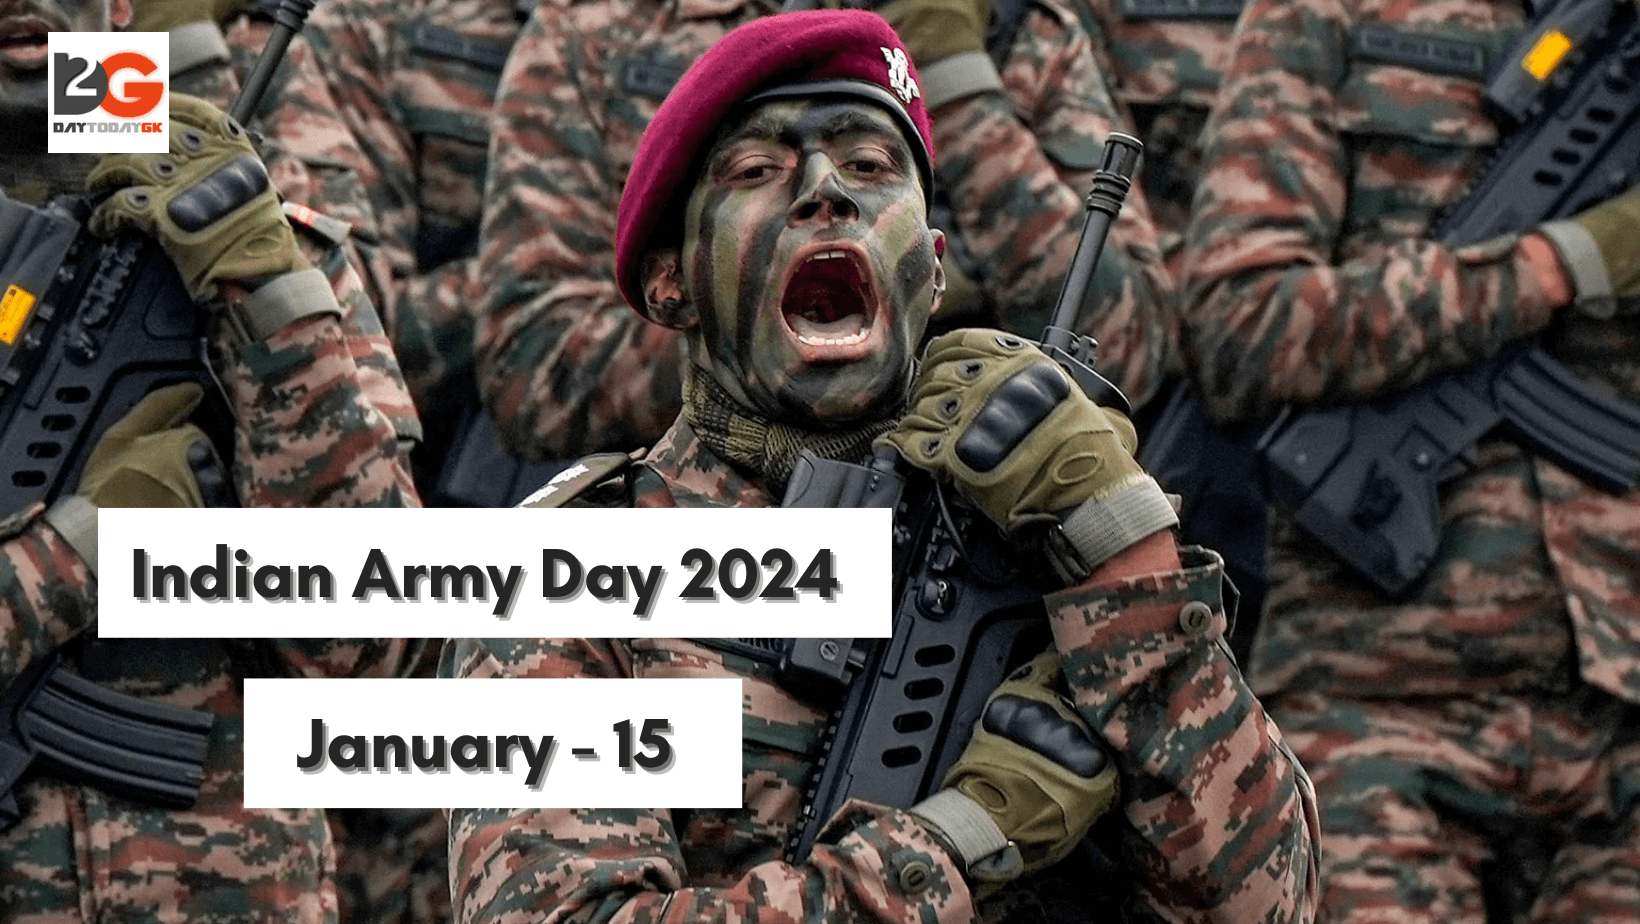 Indian Army Day 2024 is observed on January 15